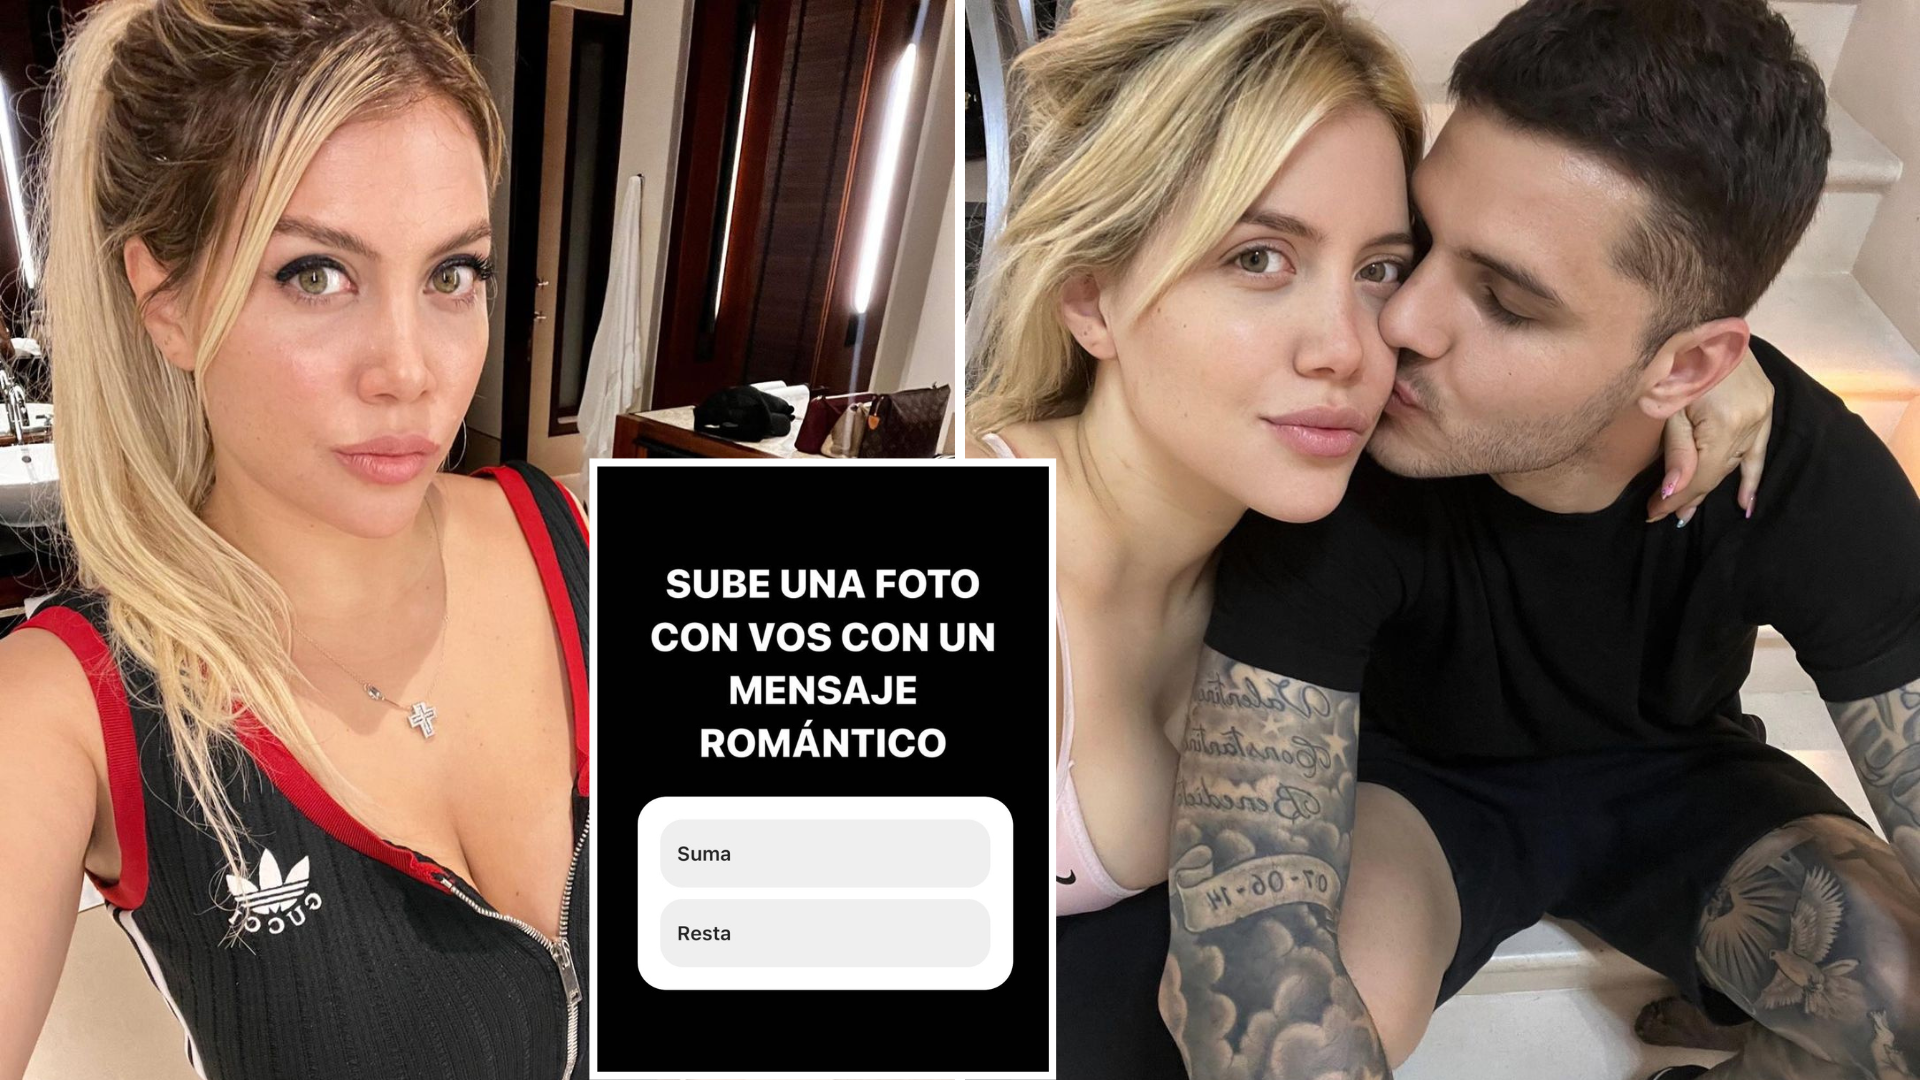 Mauro Icardi shares romantic snap with Wanda Nara on Instagram, his caption  is priceless